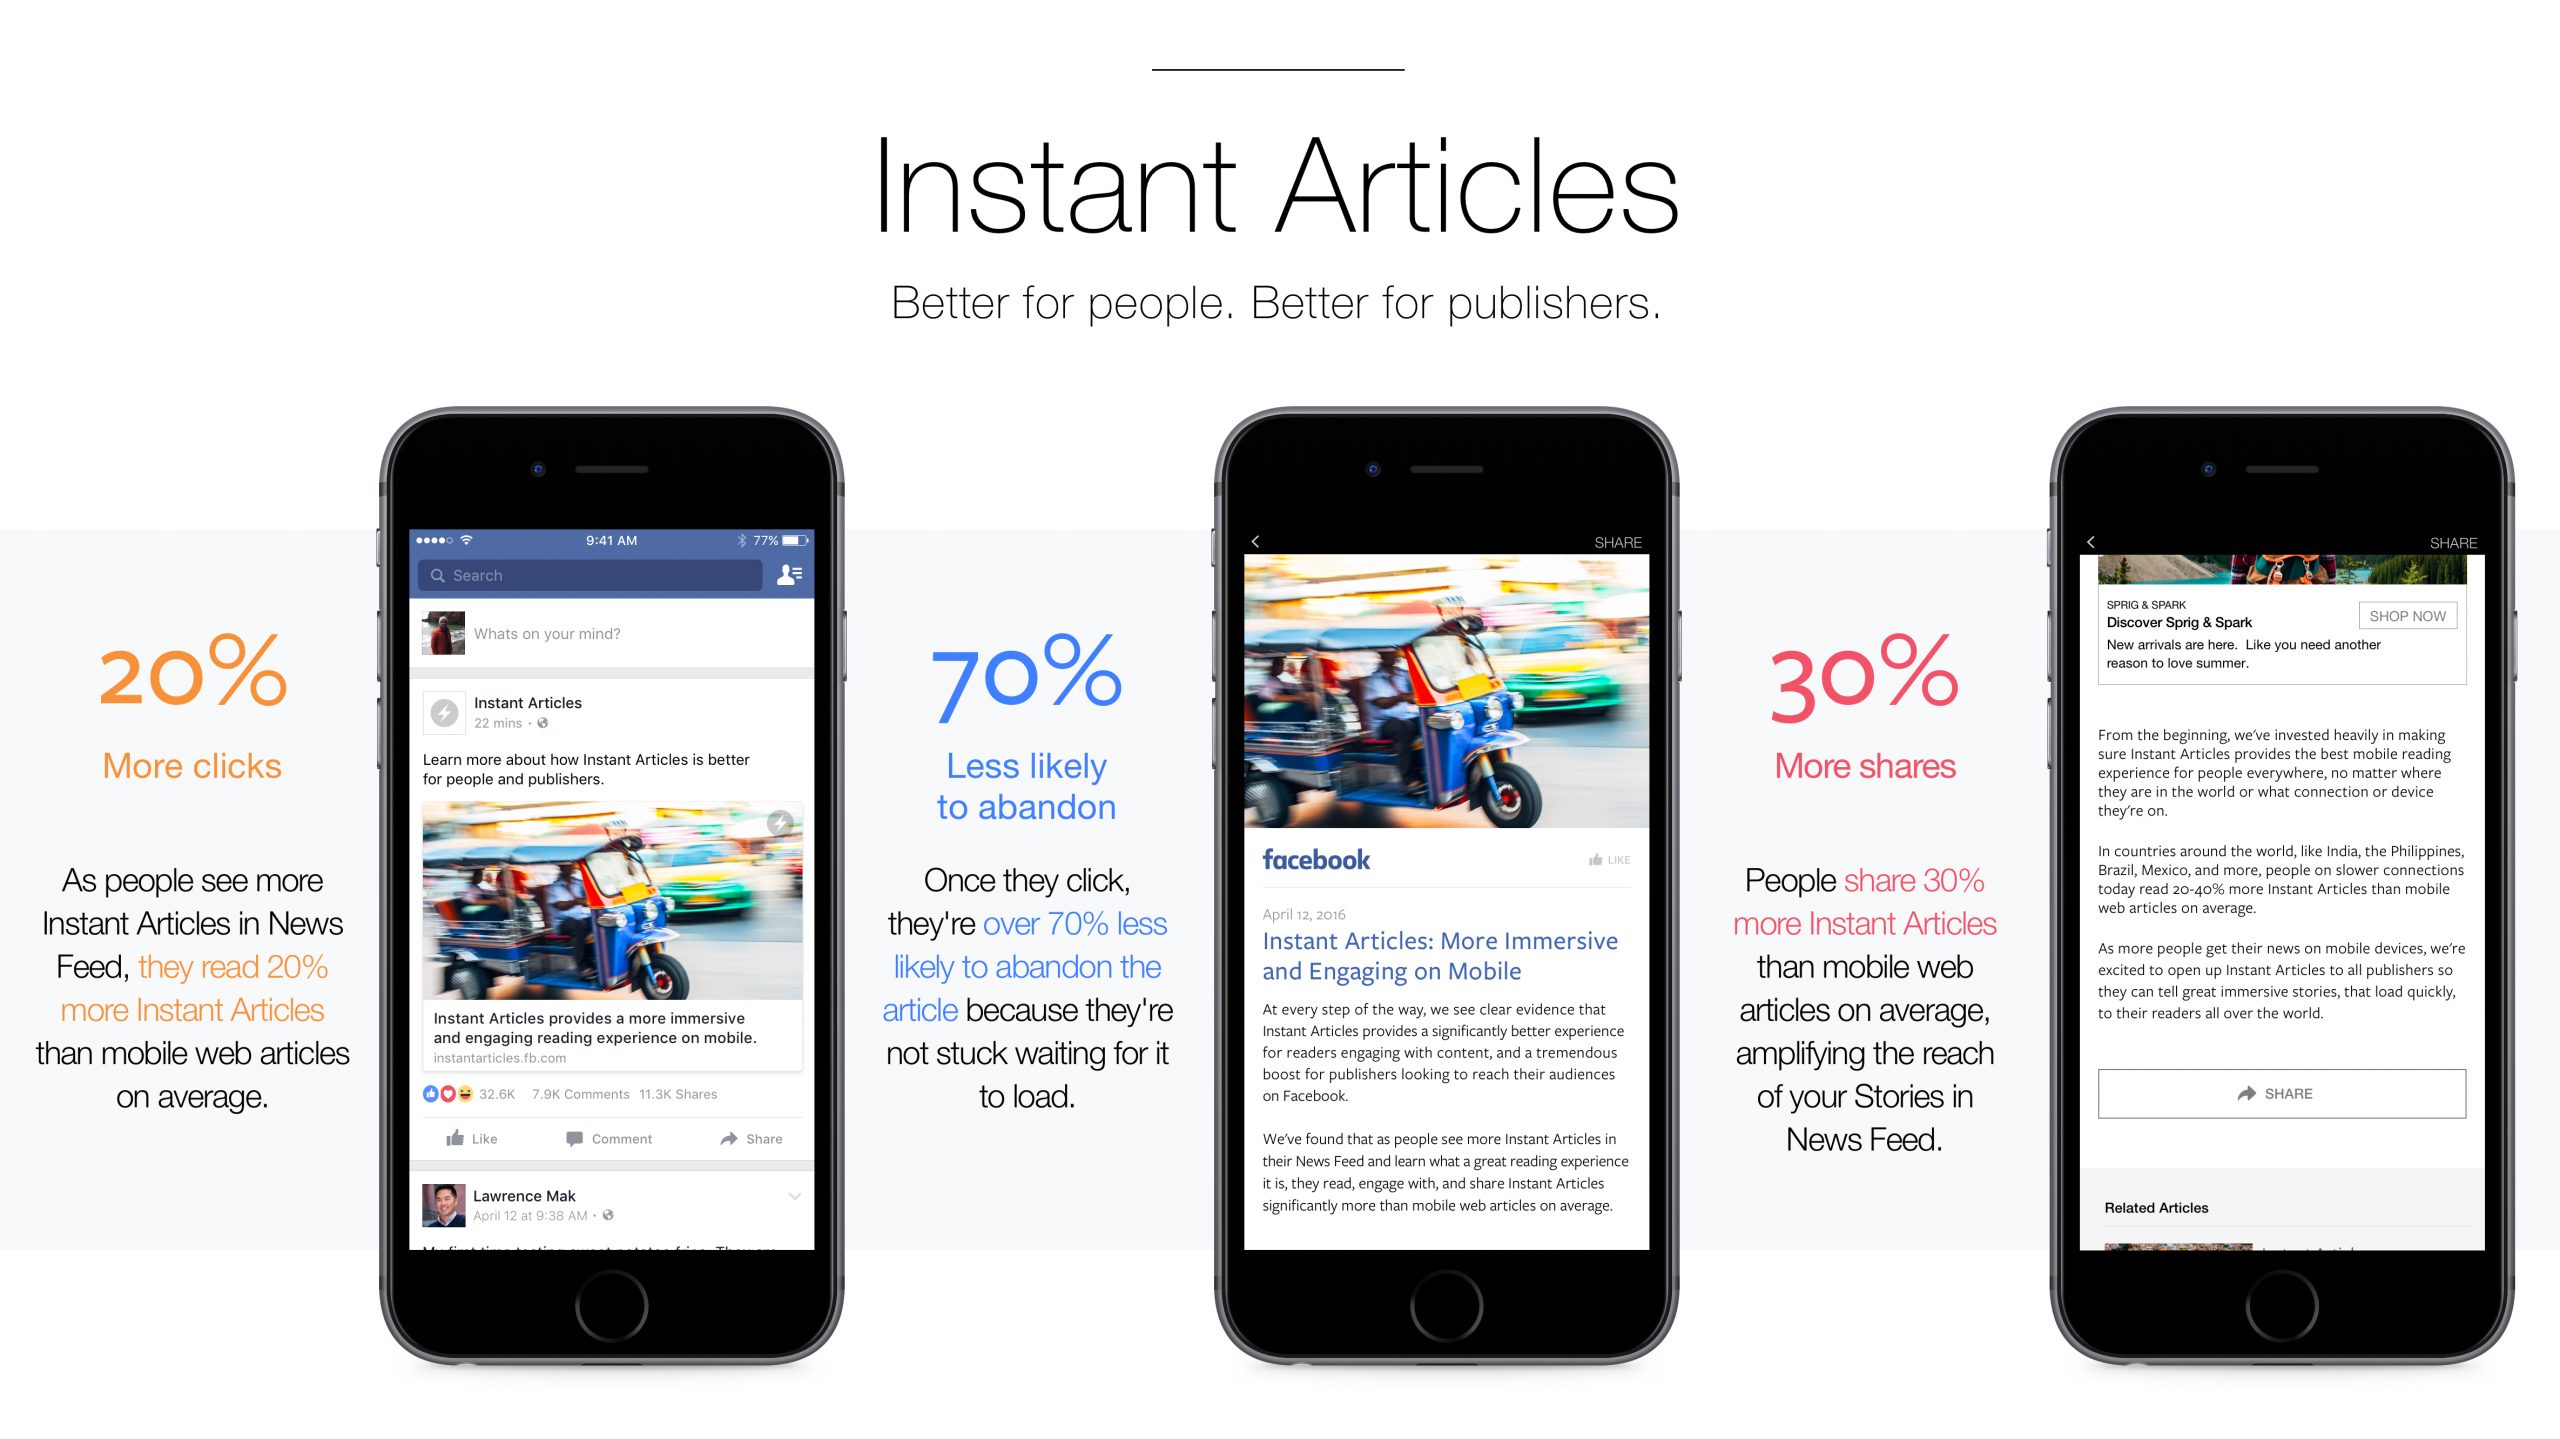 An ad for Facebook instant articles. It claims 20% more clicks, 70% less likely to abandon the article, and 30% more shares.